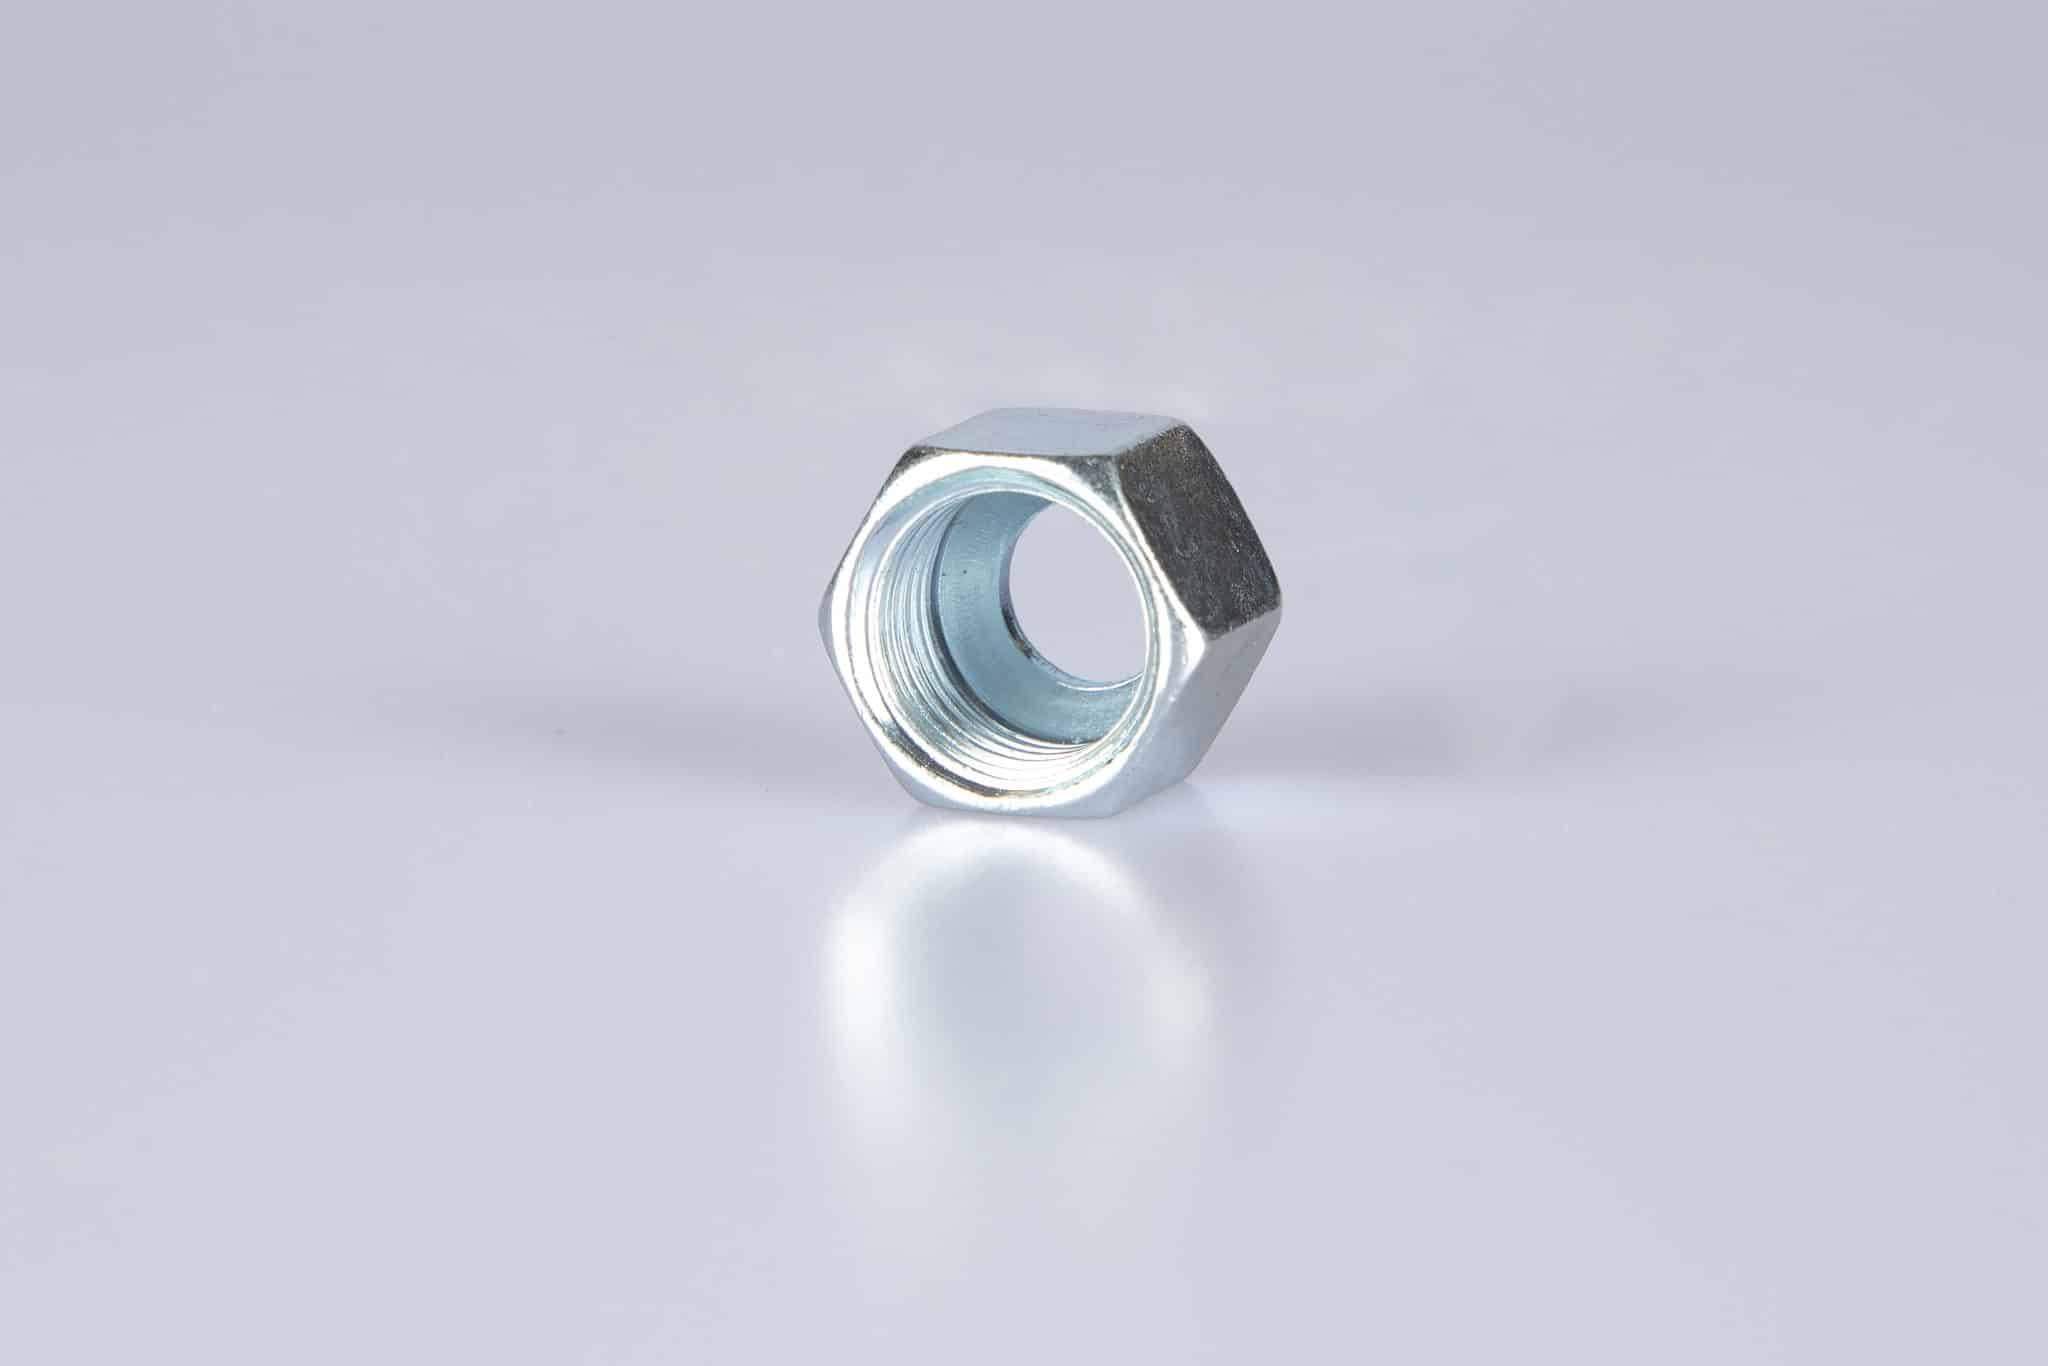 Archway Gas Valve Nut for 8mm Pipe